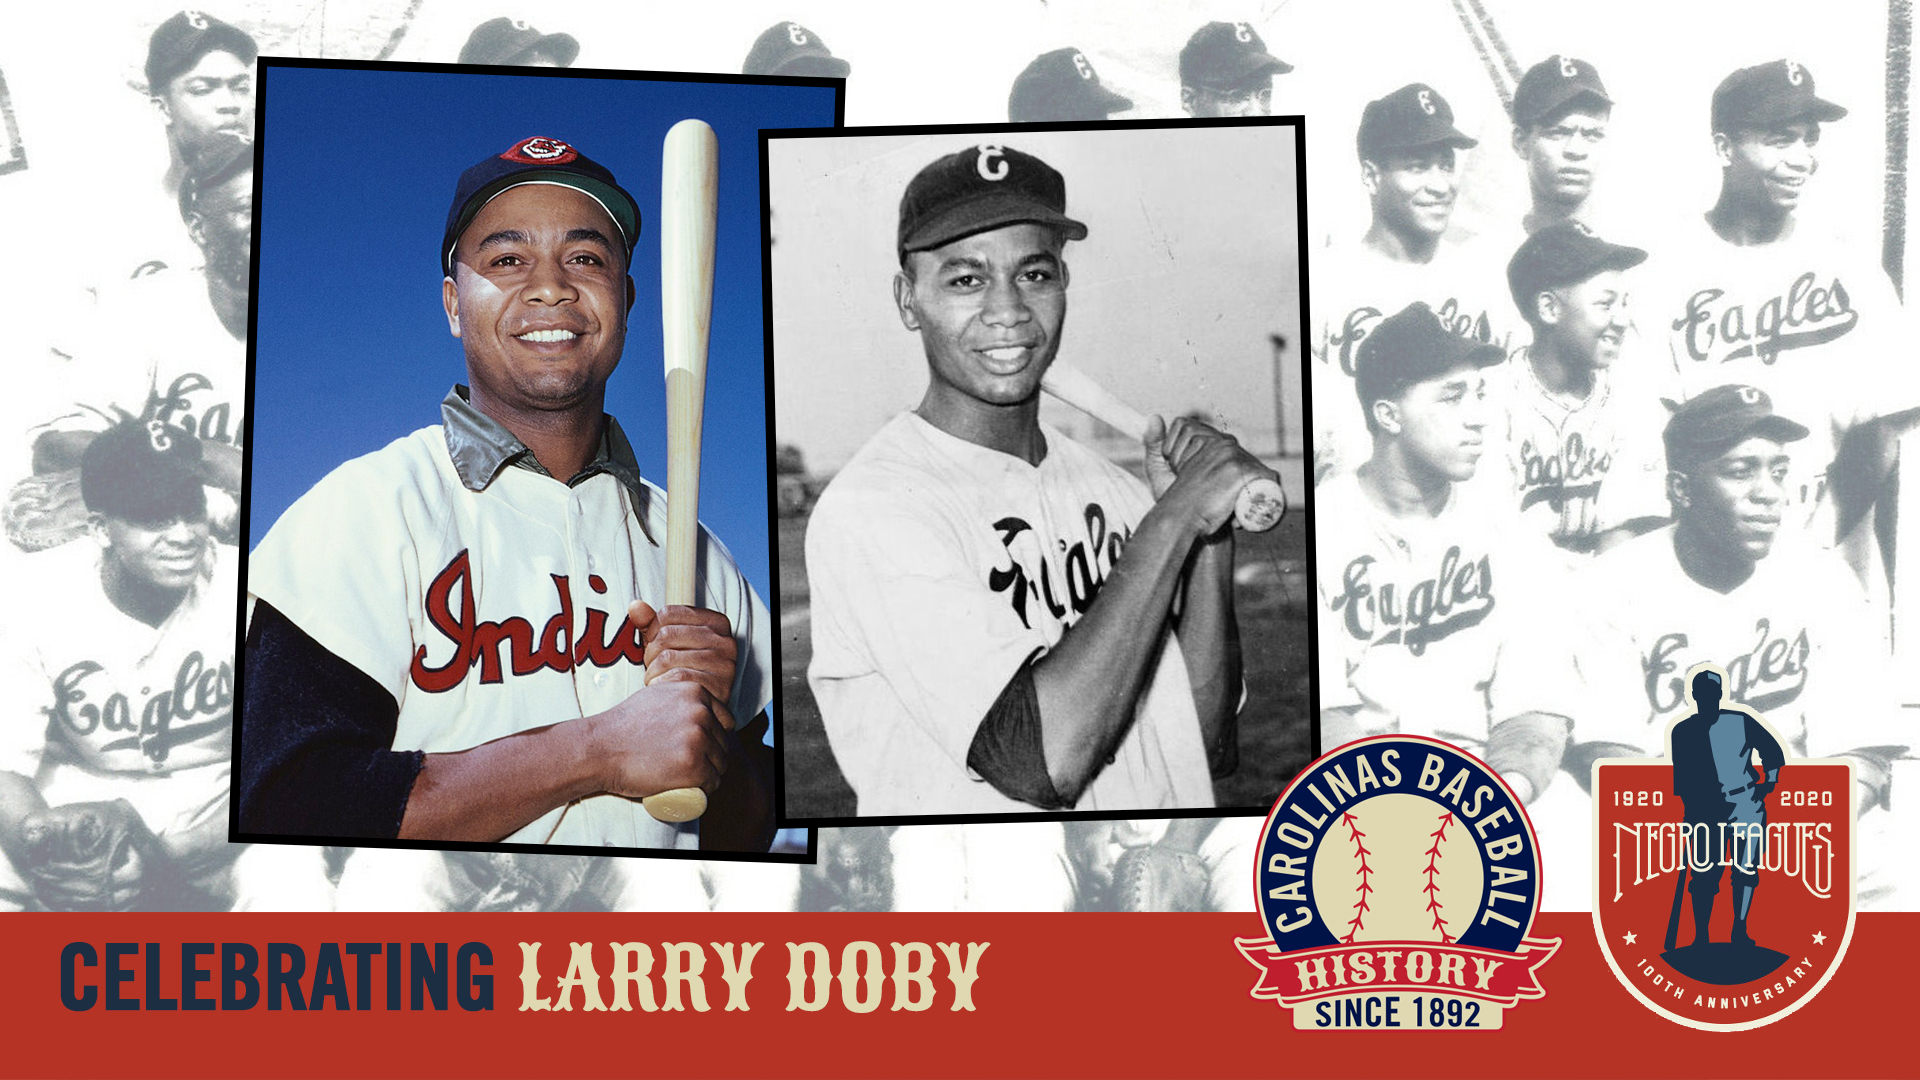 Image of From left: Satchel Paige, Larry Doby of the Cleveland Indians